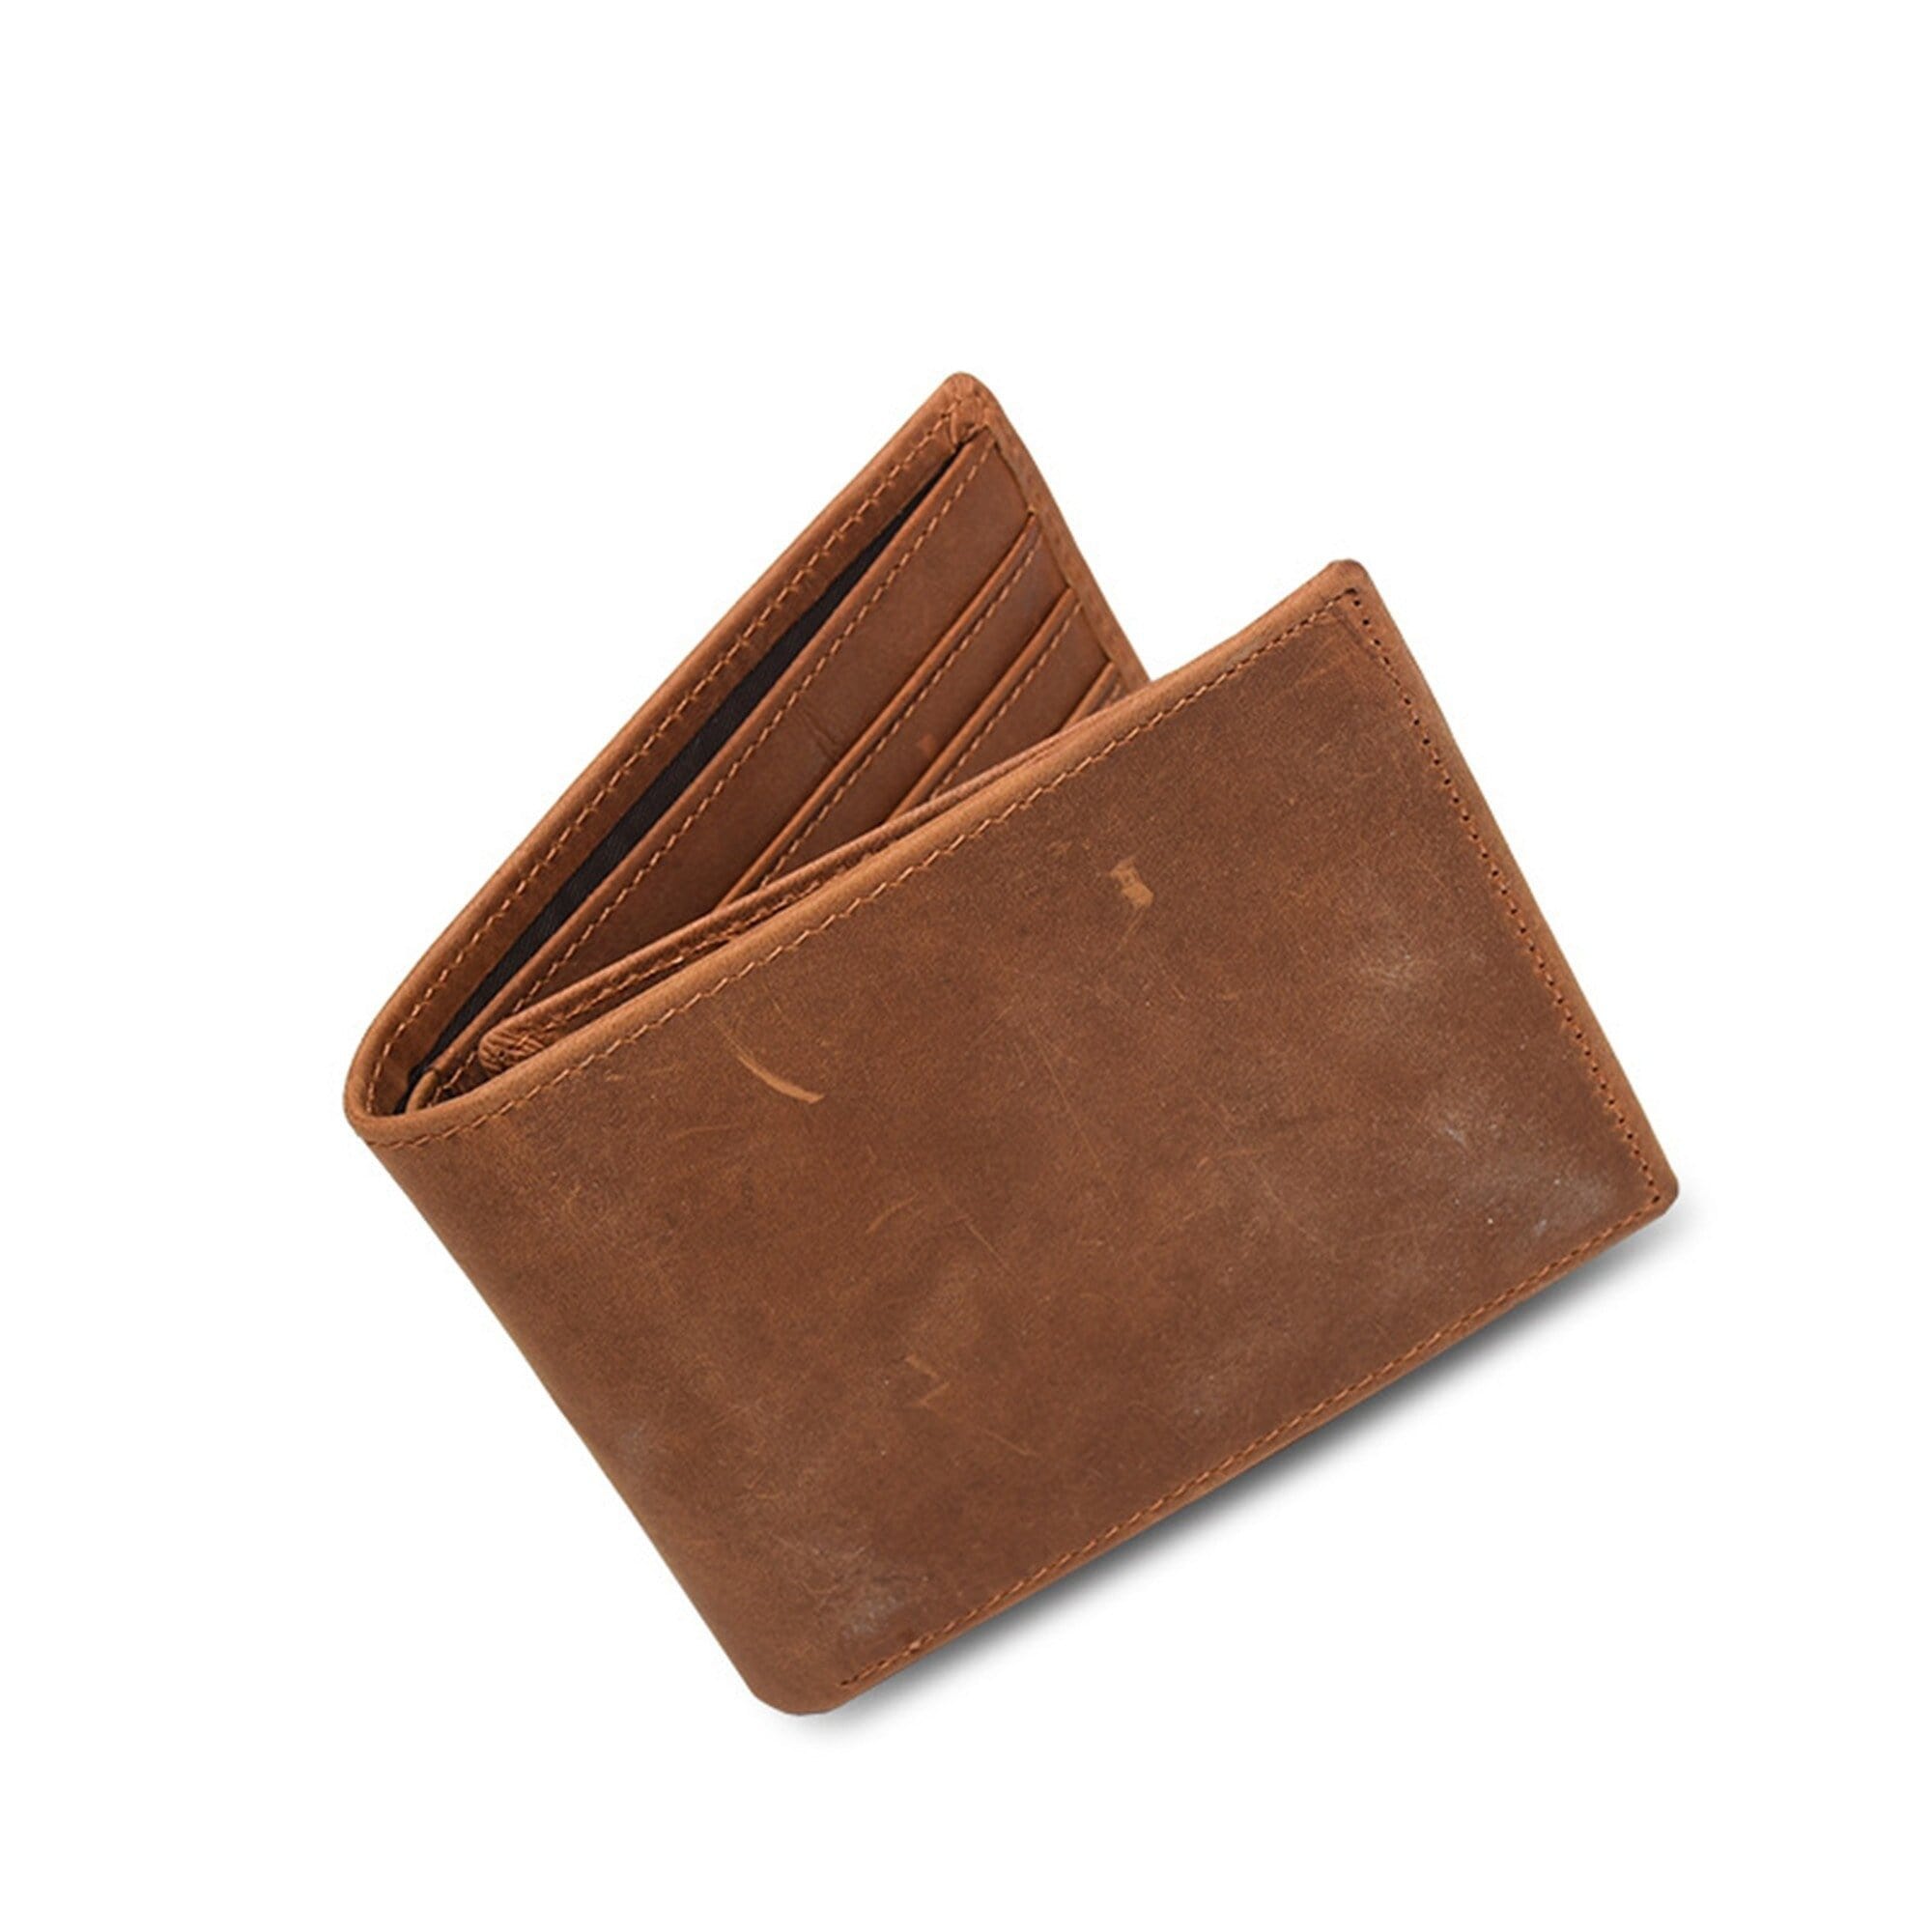 Wallets Nana To Grandson - Love You For The Rest Of Mine Bifold Leather Wallet Gift Card GiveMe-Gifts